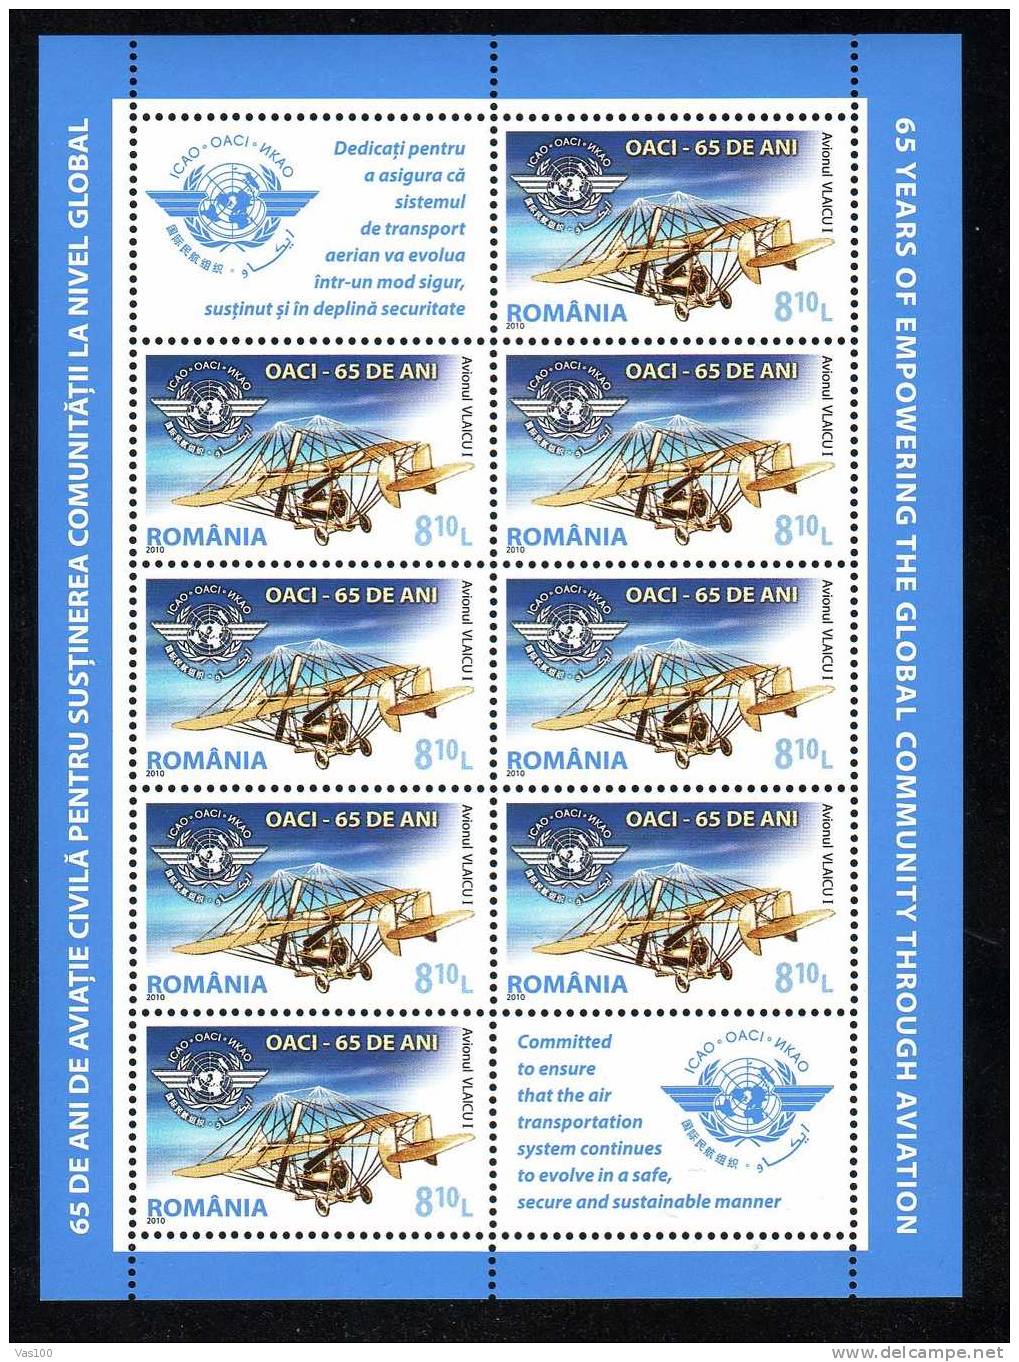 ROMANIA 2010 / OACI - ICAO / 65 Years Of Empowering The Global Community Through Aviation / MS MNH **  + 2 Labels - Altri (Aria)